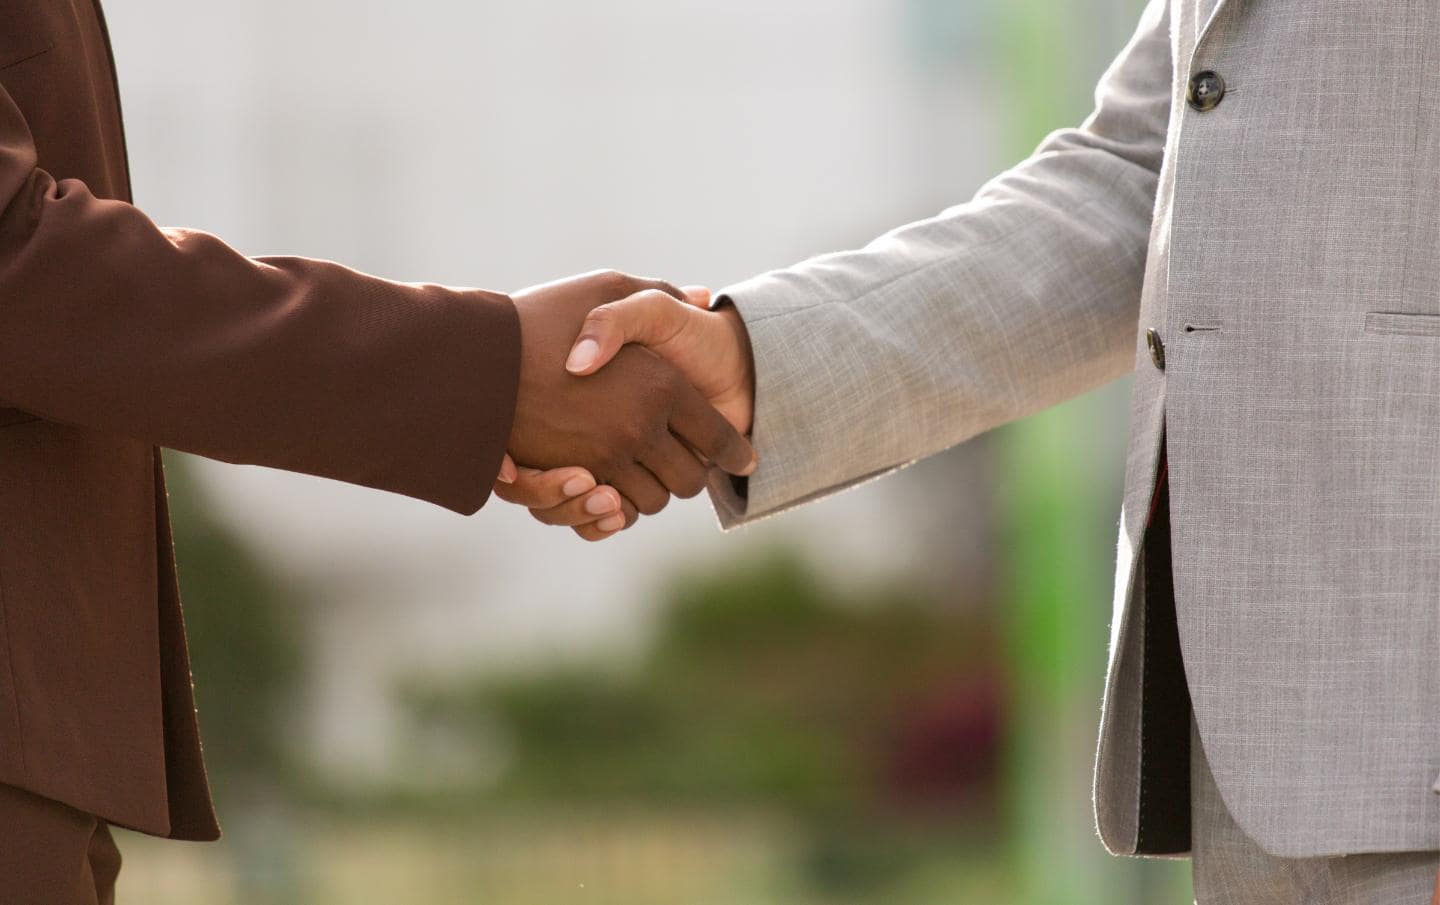 An S M E business owner and an Elite HubSpot Partner marketing agency shaking hands as they agree to partner together for the S M E's marketing practices